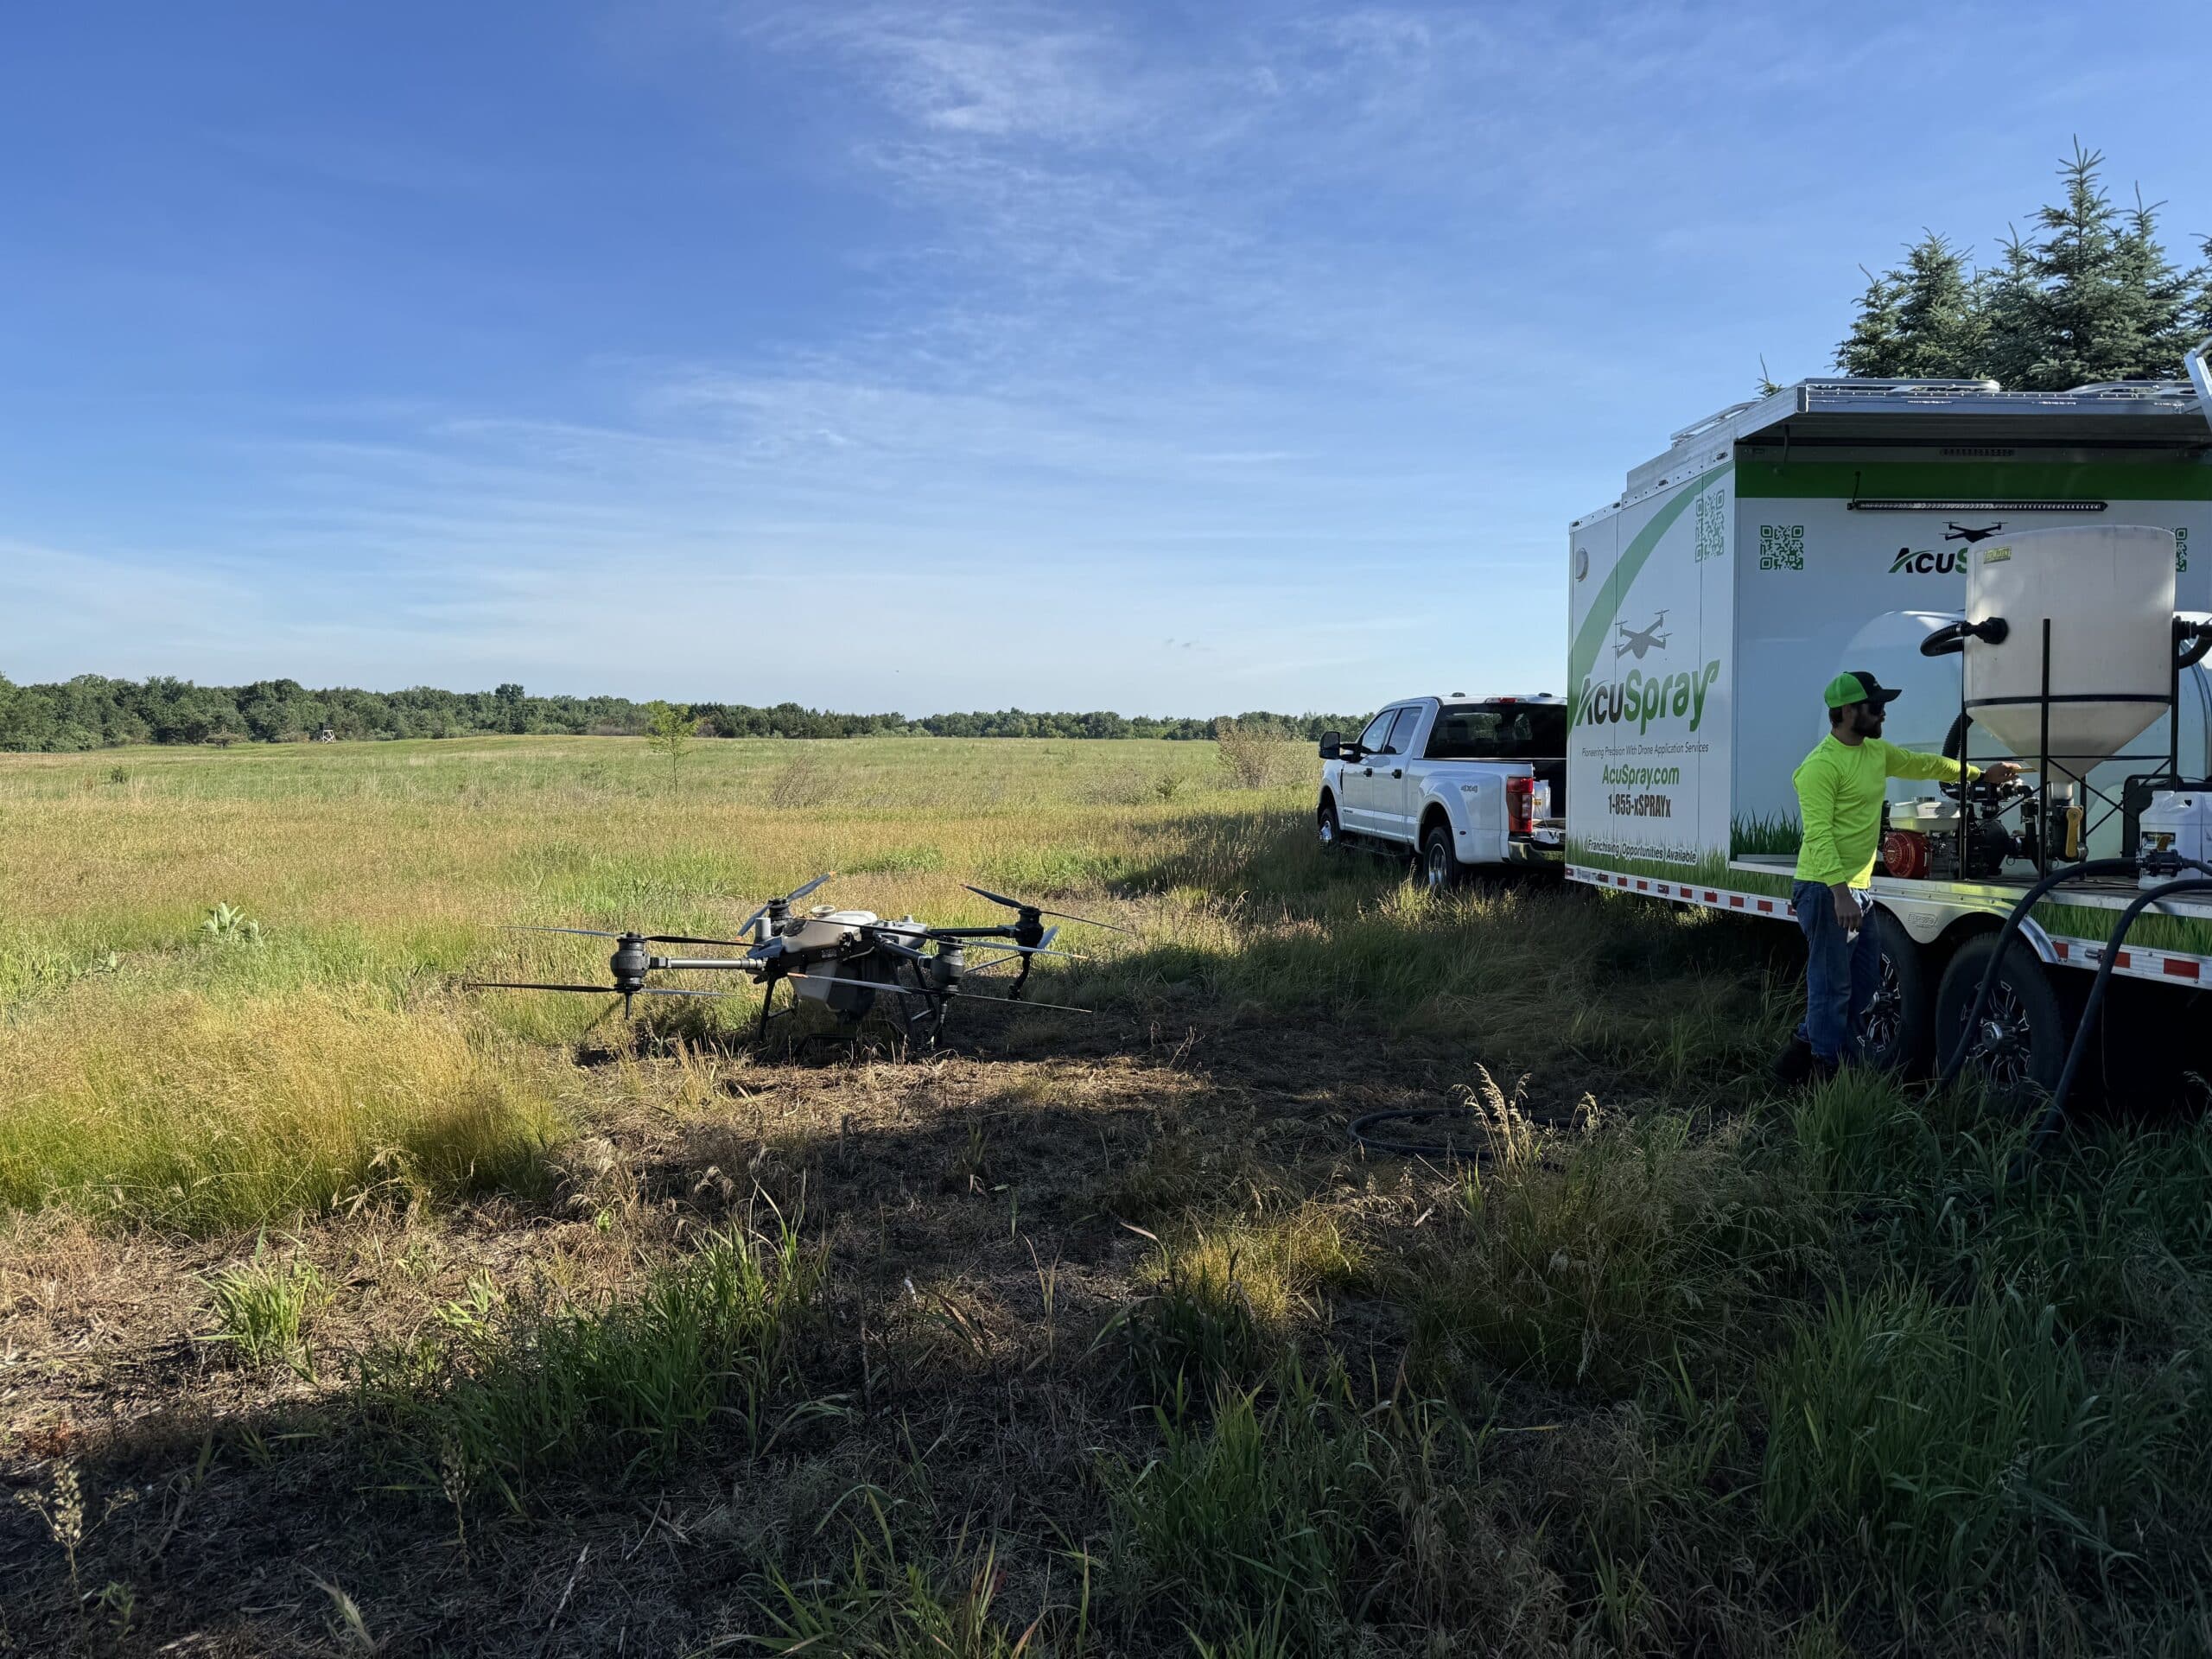 A technician prepares a drone next to an AcuSpray trailer in a field, illustrating the use of drone technology in precision agriculture for crop monitoring and treatment.